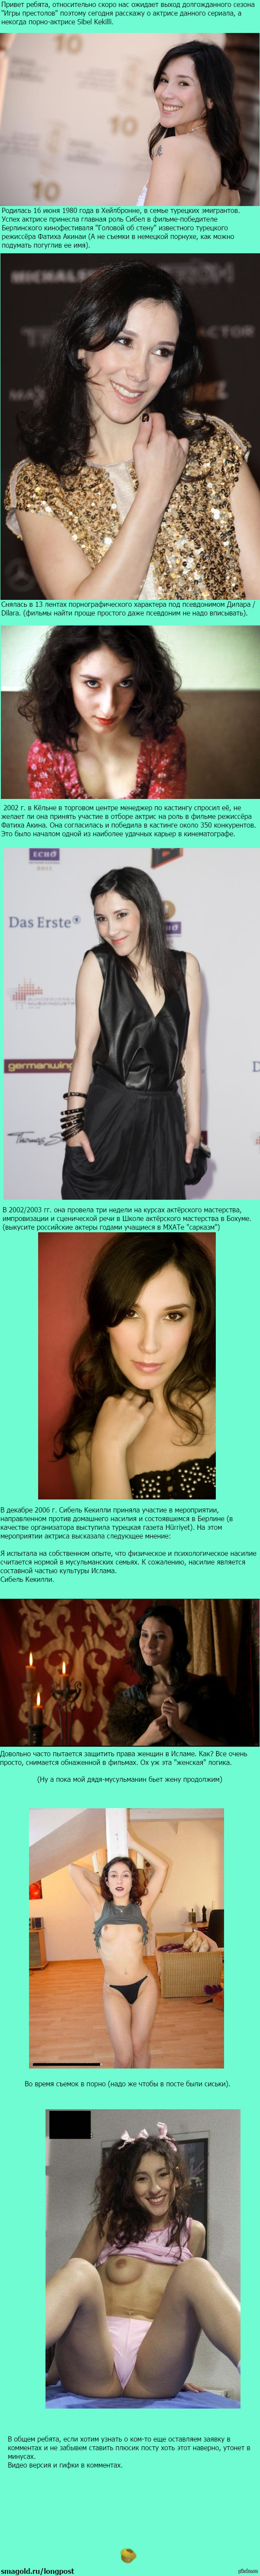 Some information about Sibel Kekilli, the actress of Game of Thrones and the former actress of the erotic genre - NSFW, My, Longpost, Game of Thrones, My, Shaya, Porn, Masturbation, Girls, 